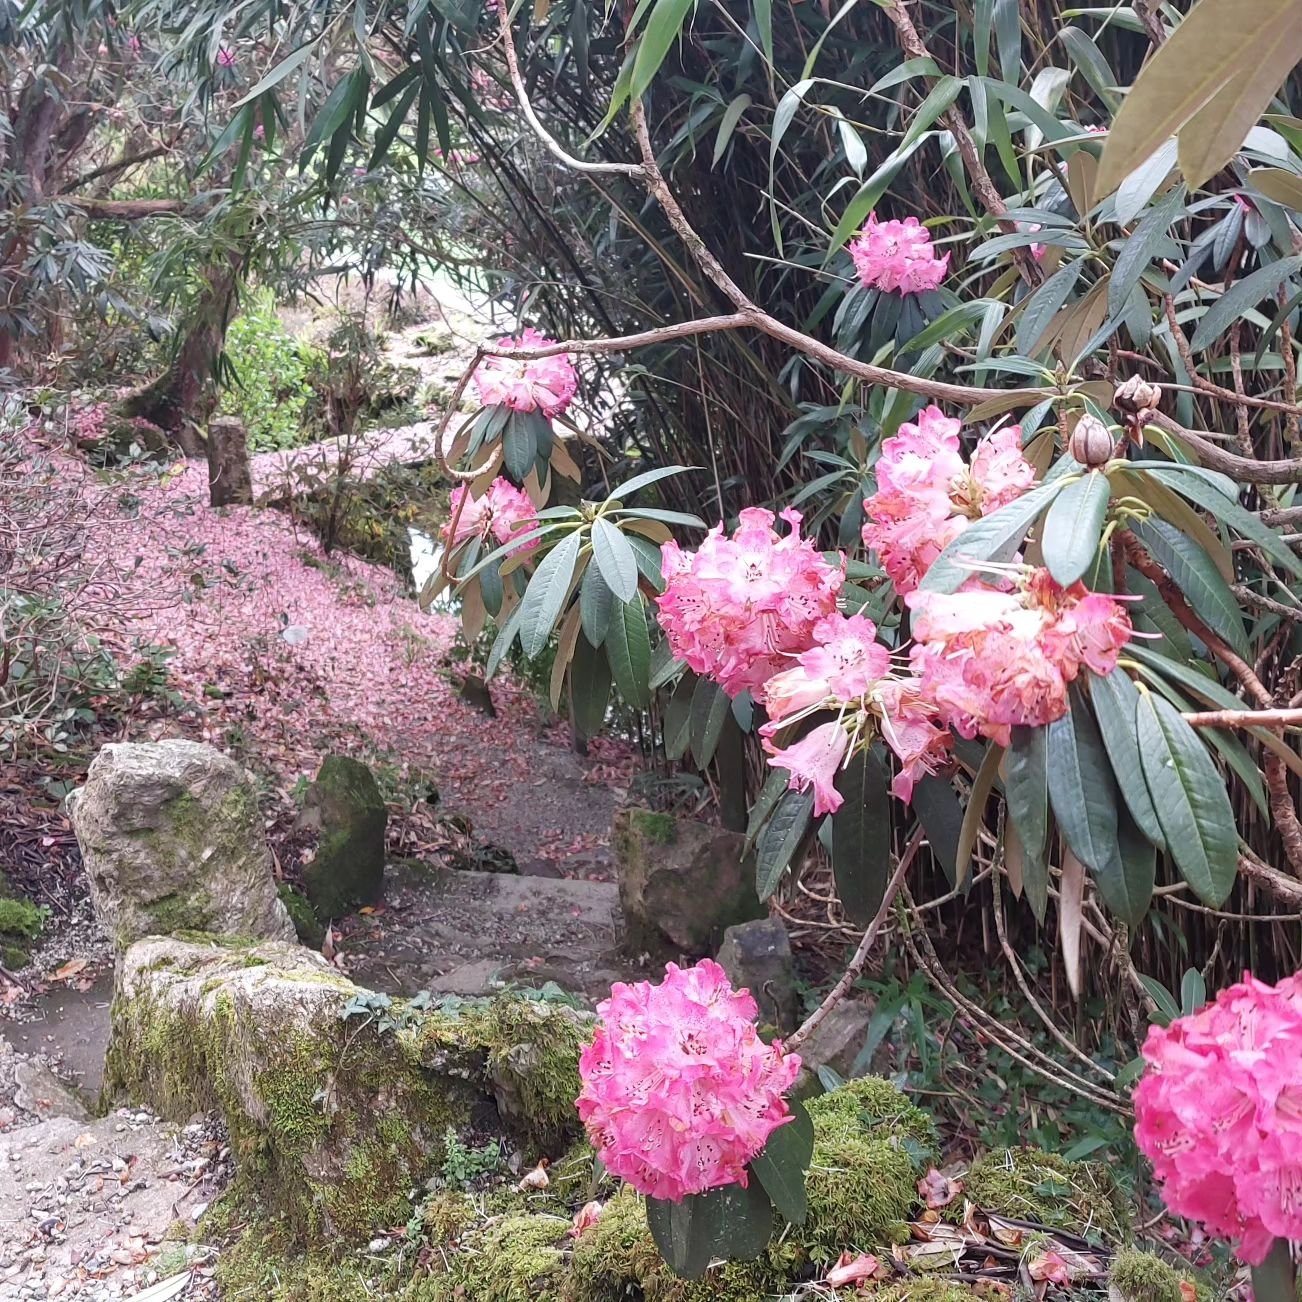 Paths carpeted with rhododendron petals - really magical! Lukesland Gardens are open 11am to 5pm on Suns, Weds and Bank Hols till 9th June. Full details at www.lukesland.co.uk